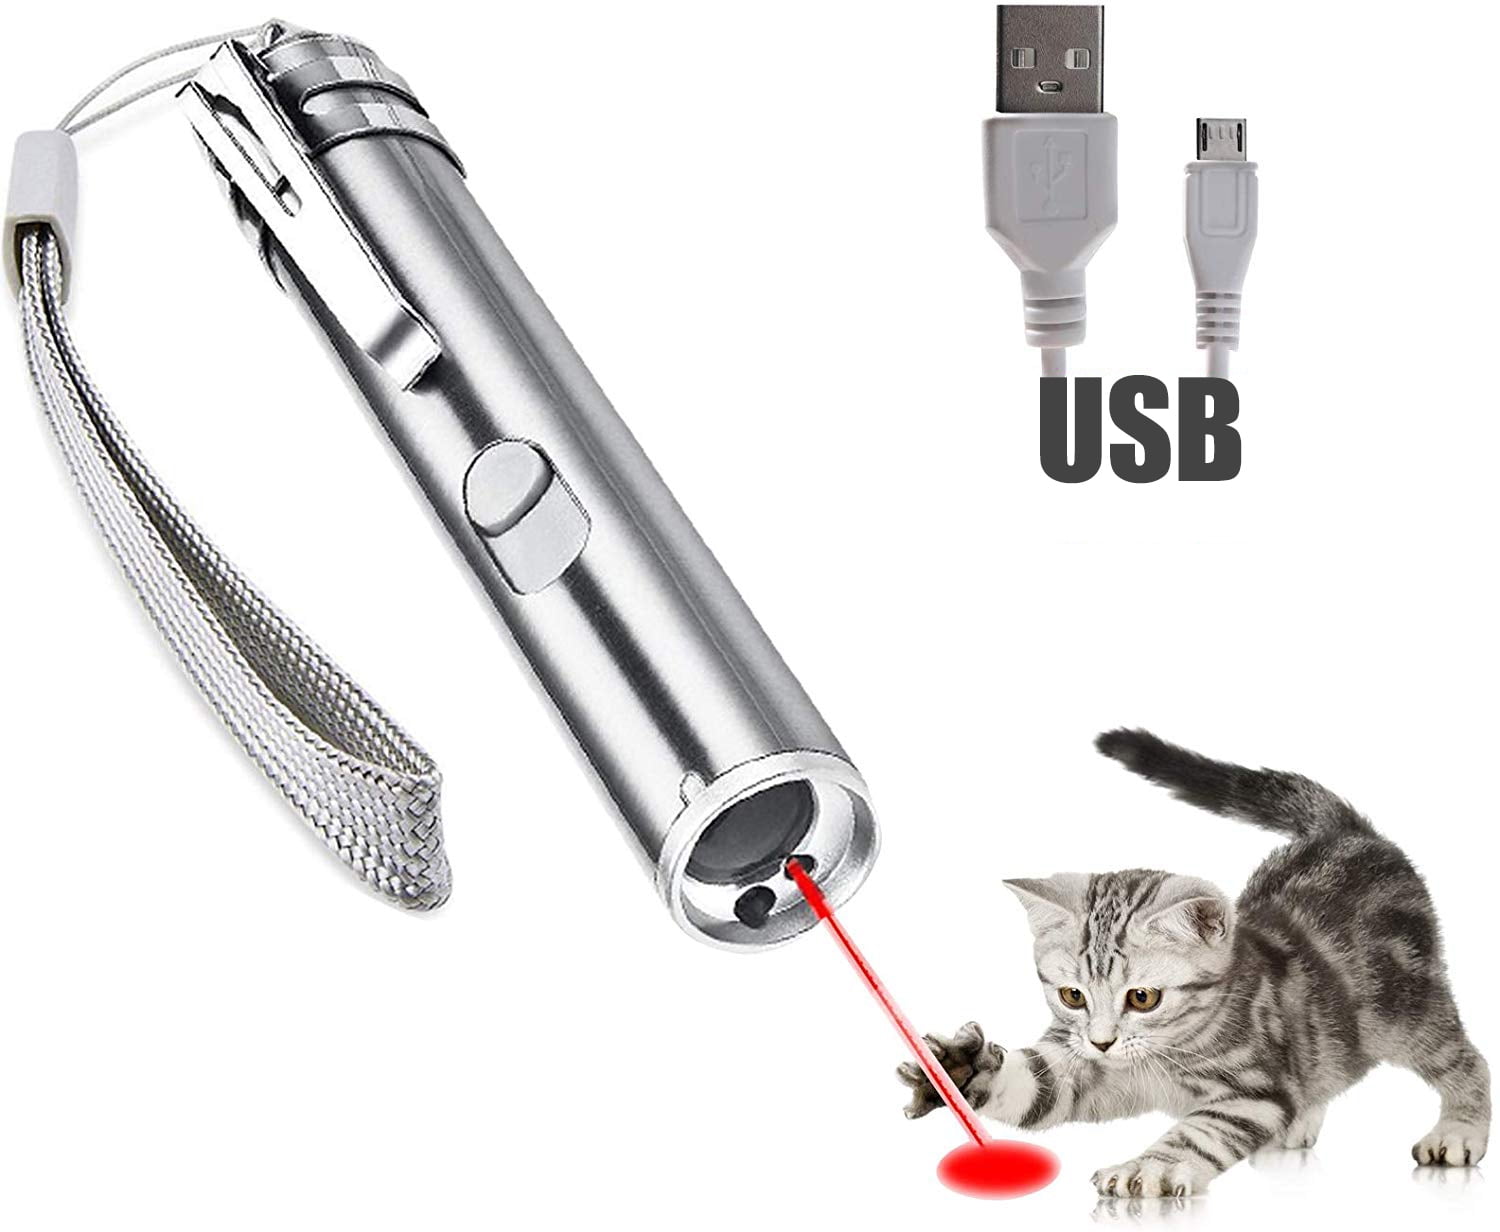 USB LASER POINTER RECHARGEABLE PEN ~ 3 in 1 Cat Pet Toy Red UV Flashlight SI 